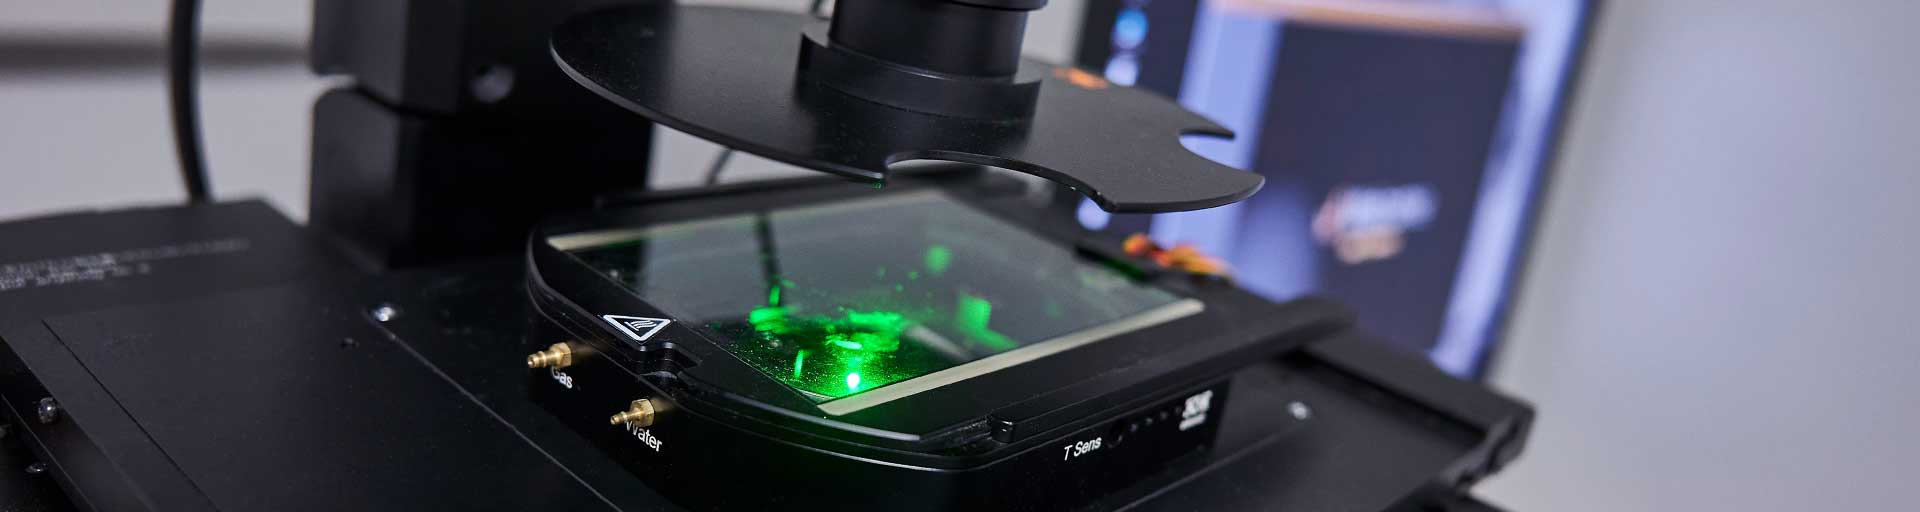 abberior microscope during measurement showing green laser light and a microscopic image